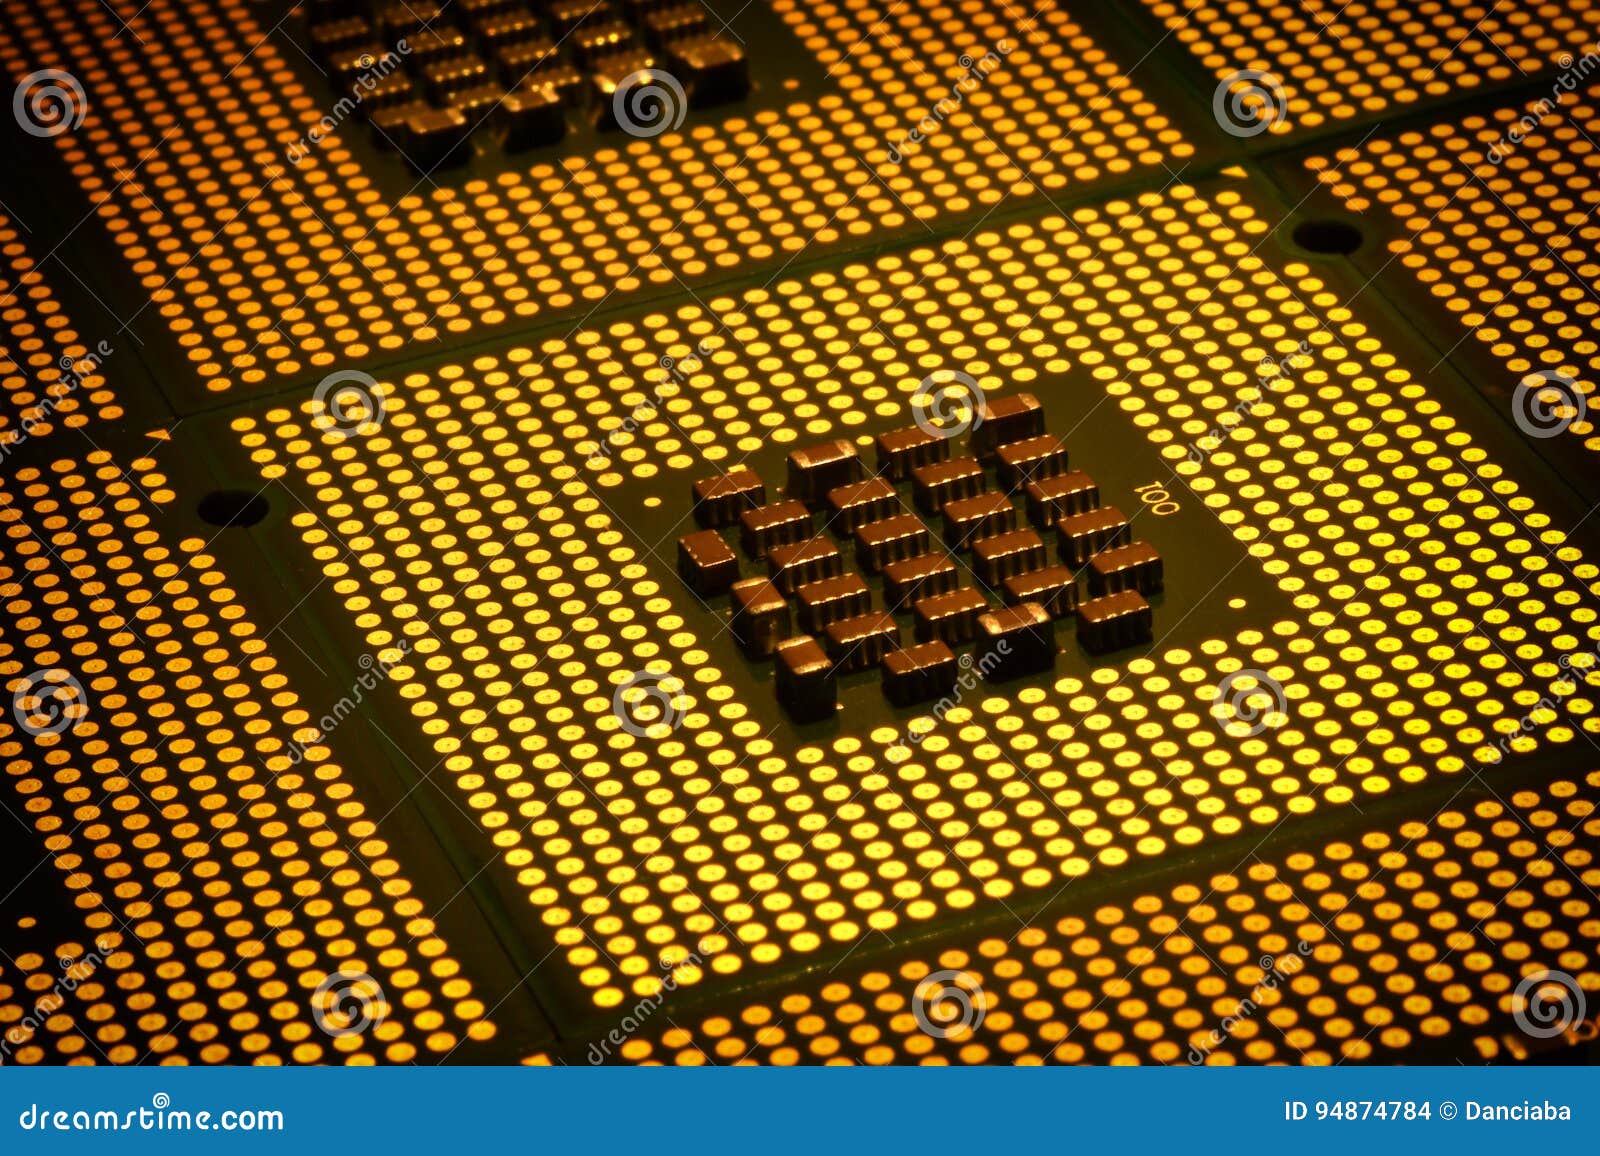 computer processors aligned as background